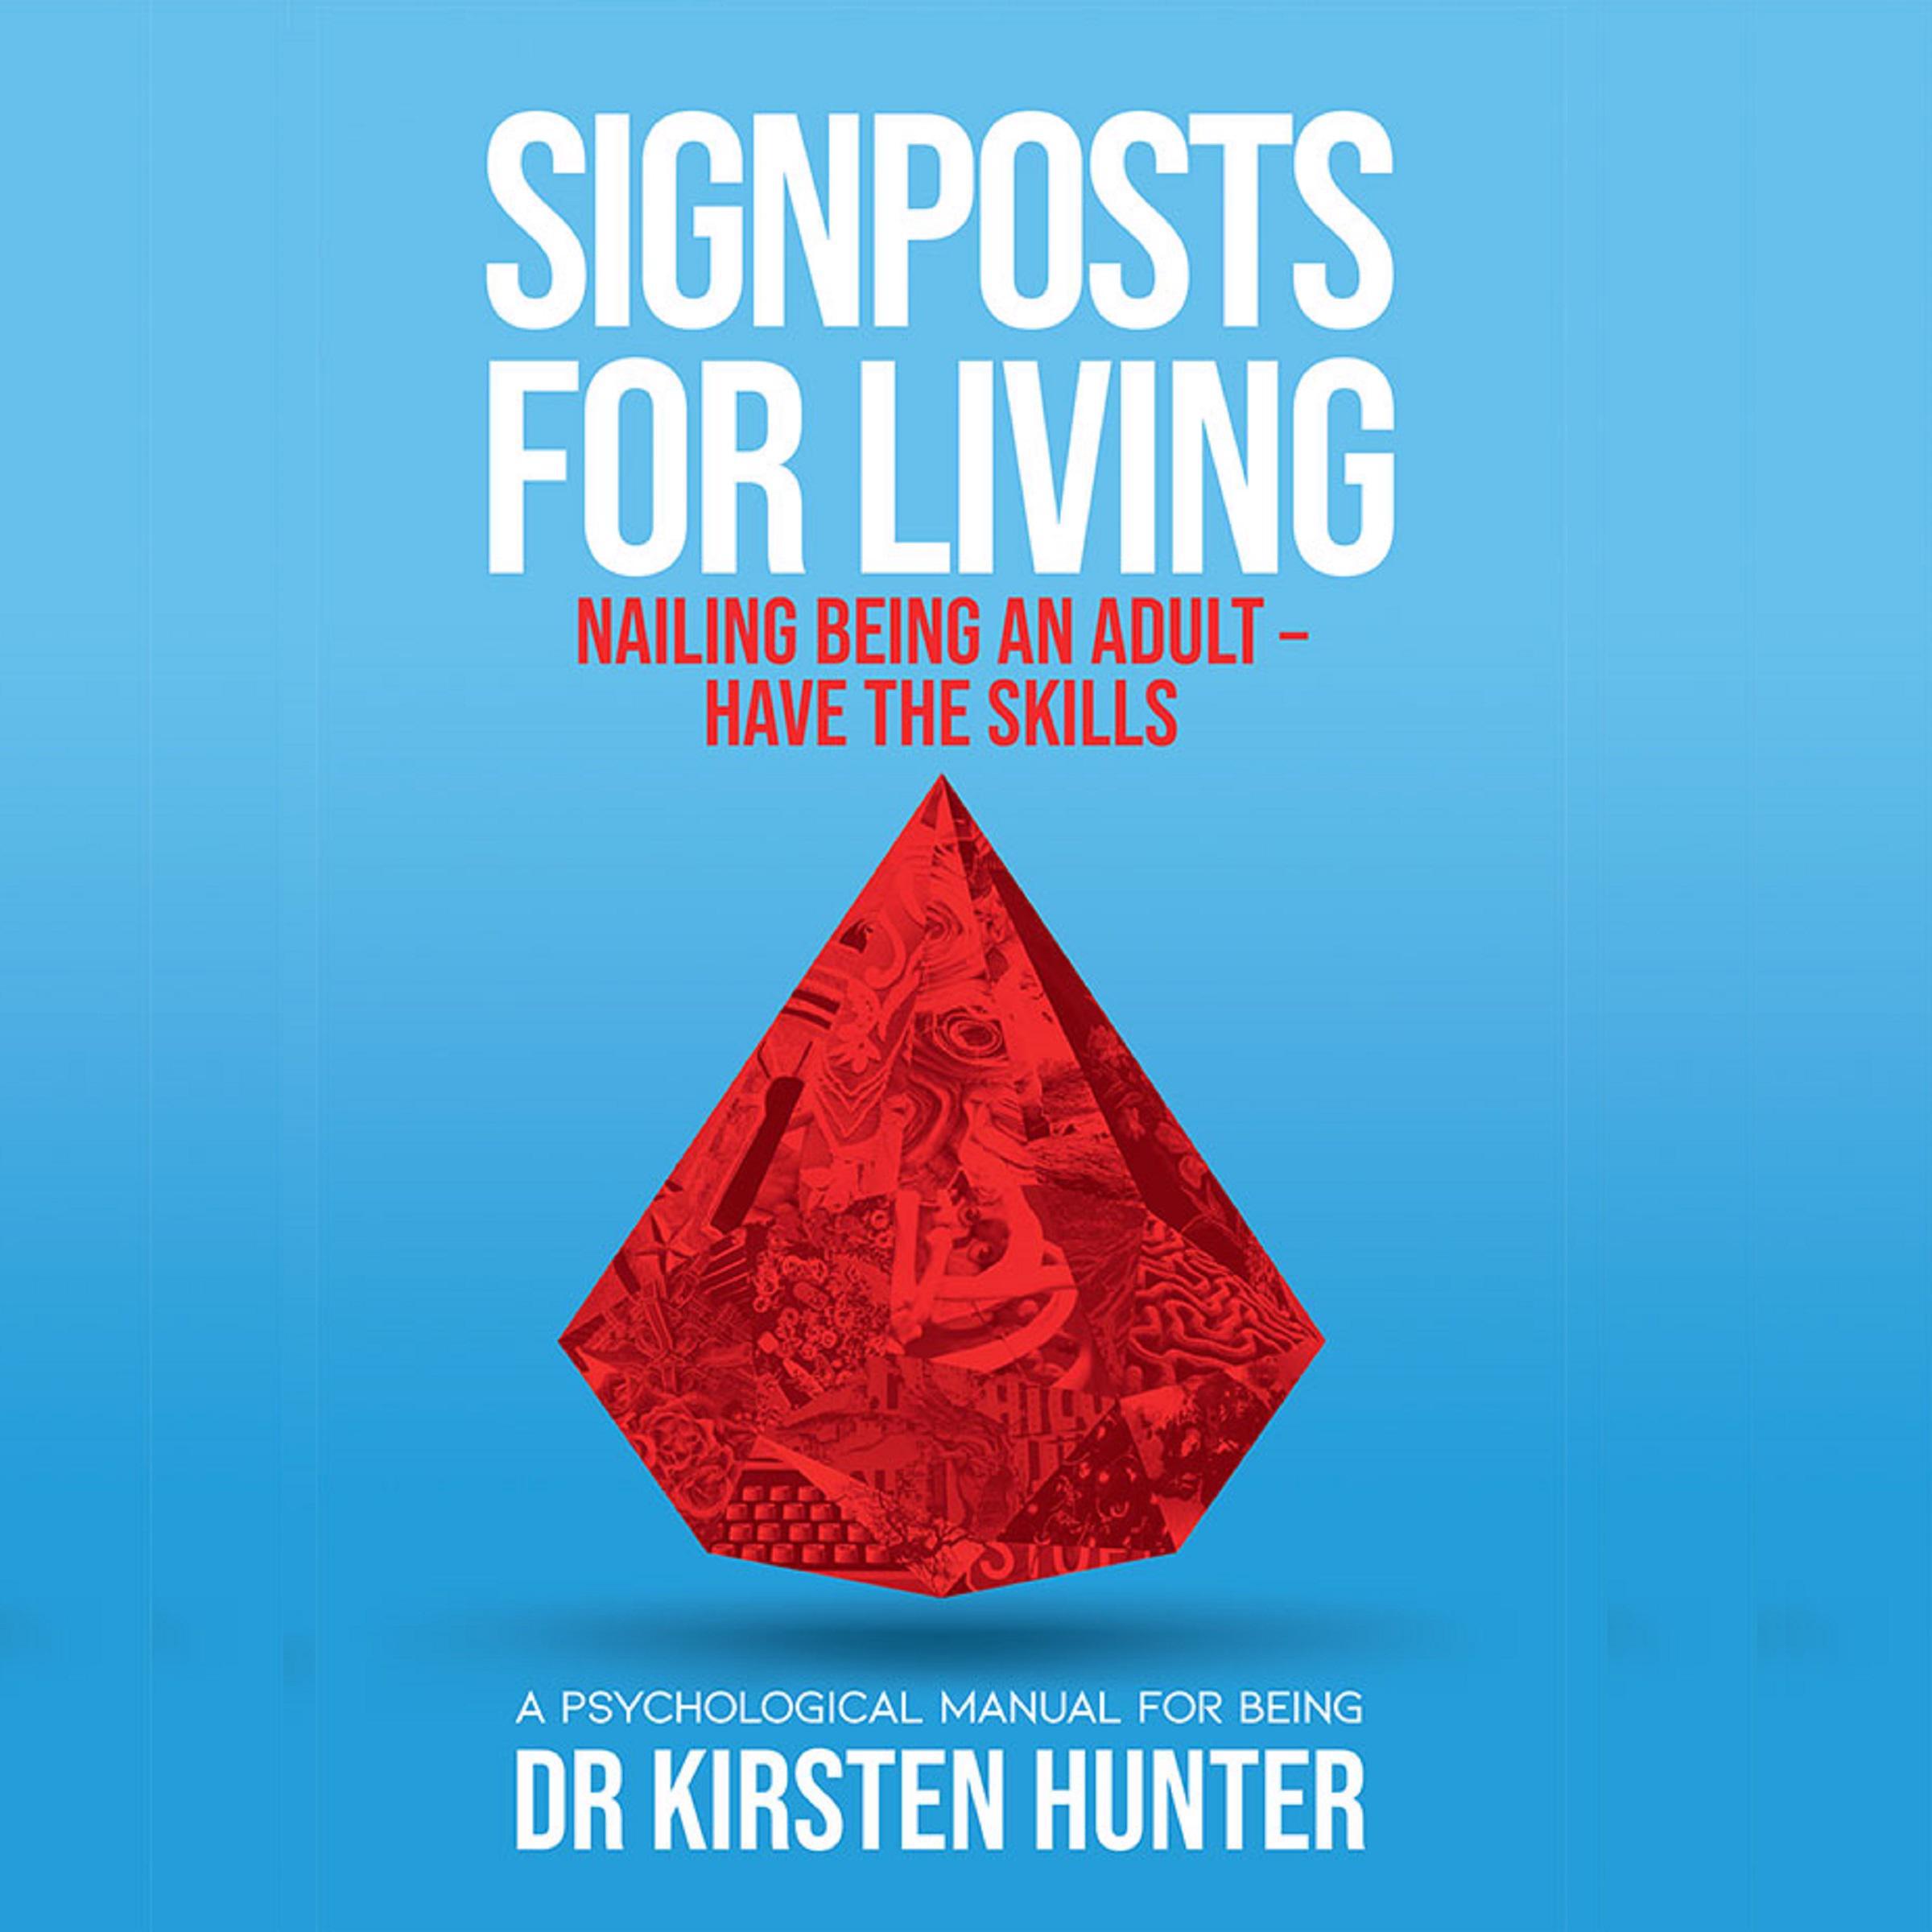 Signposts for Living - A Psychological Manual for Being - Book 6: Nailing being an adult